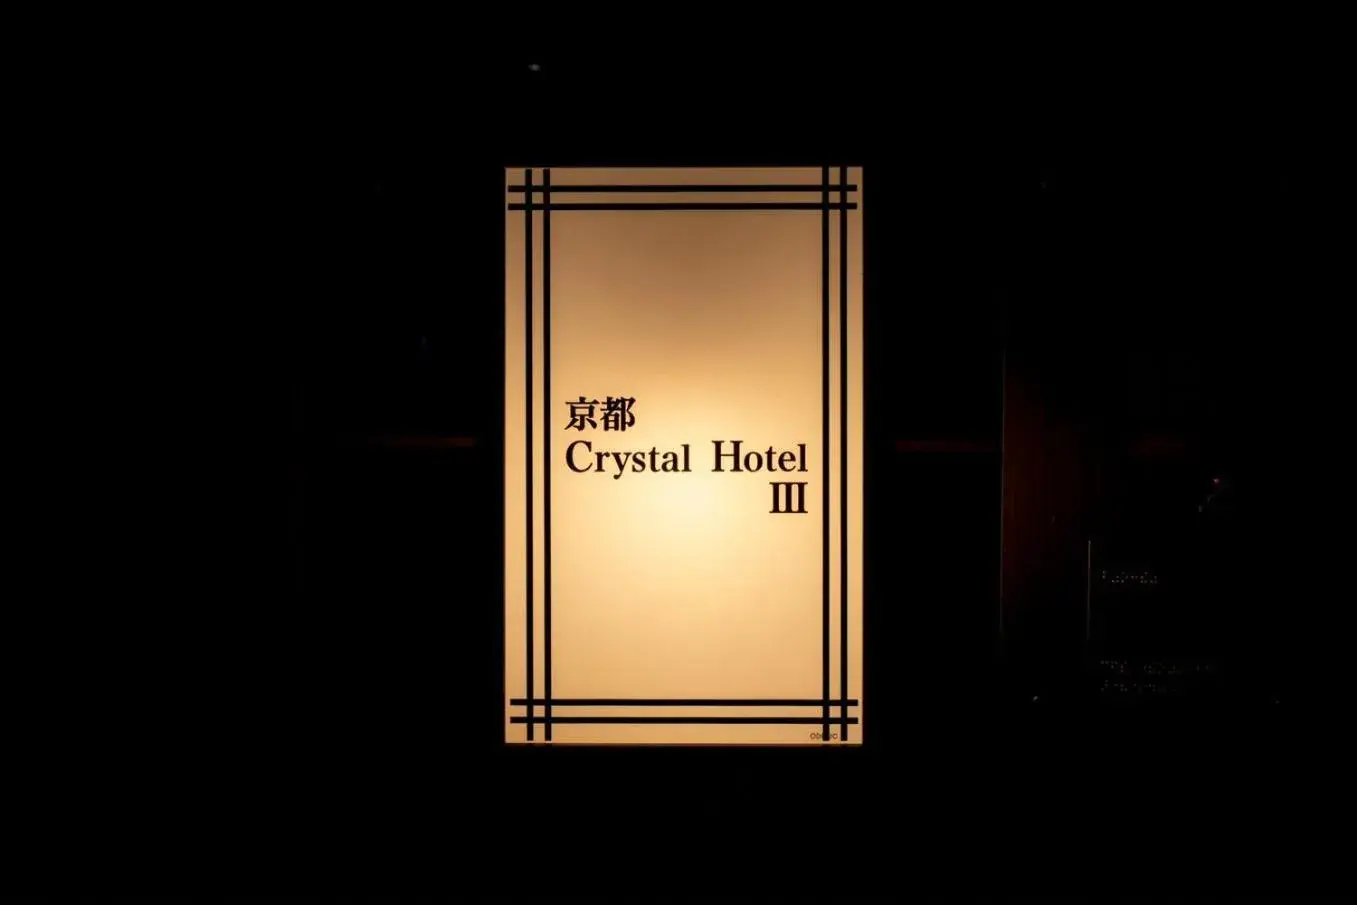 Property logo or sign in Kyoto Crystal Hotel Ⅲ